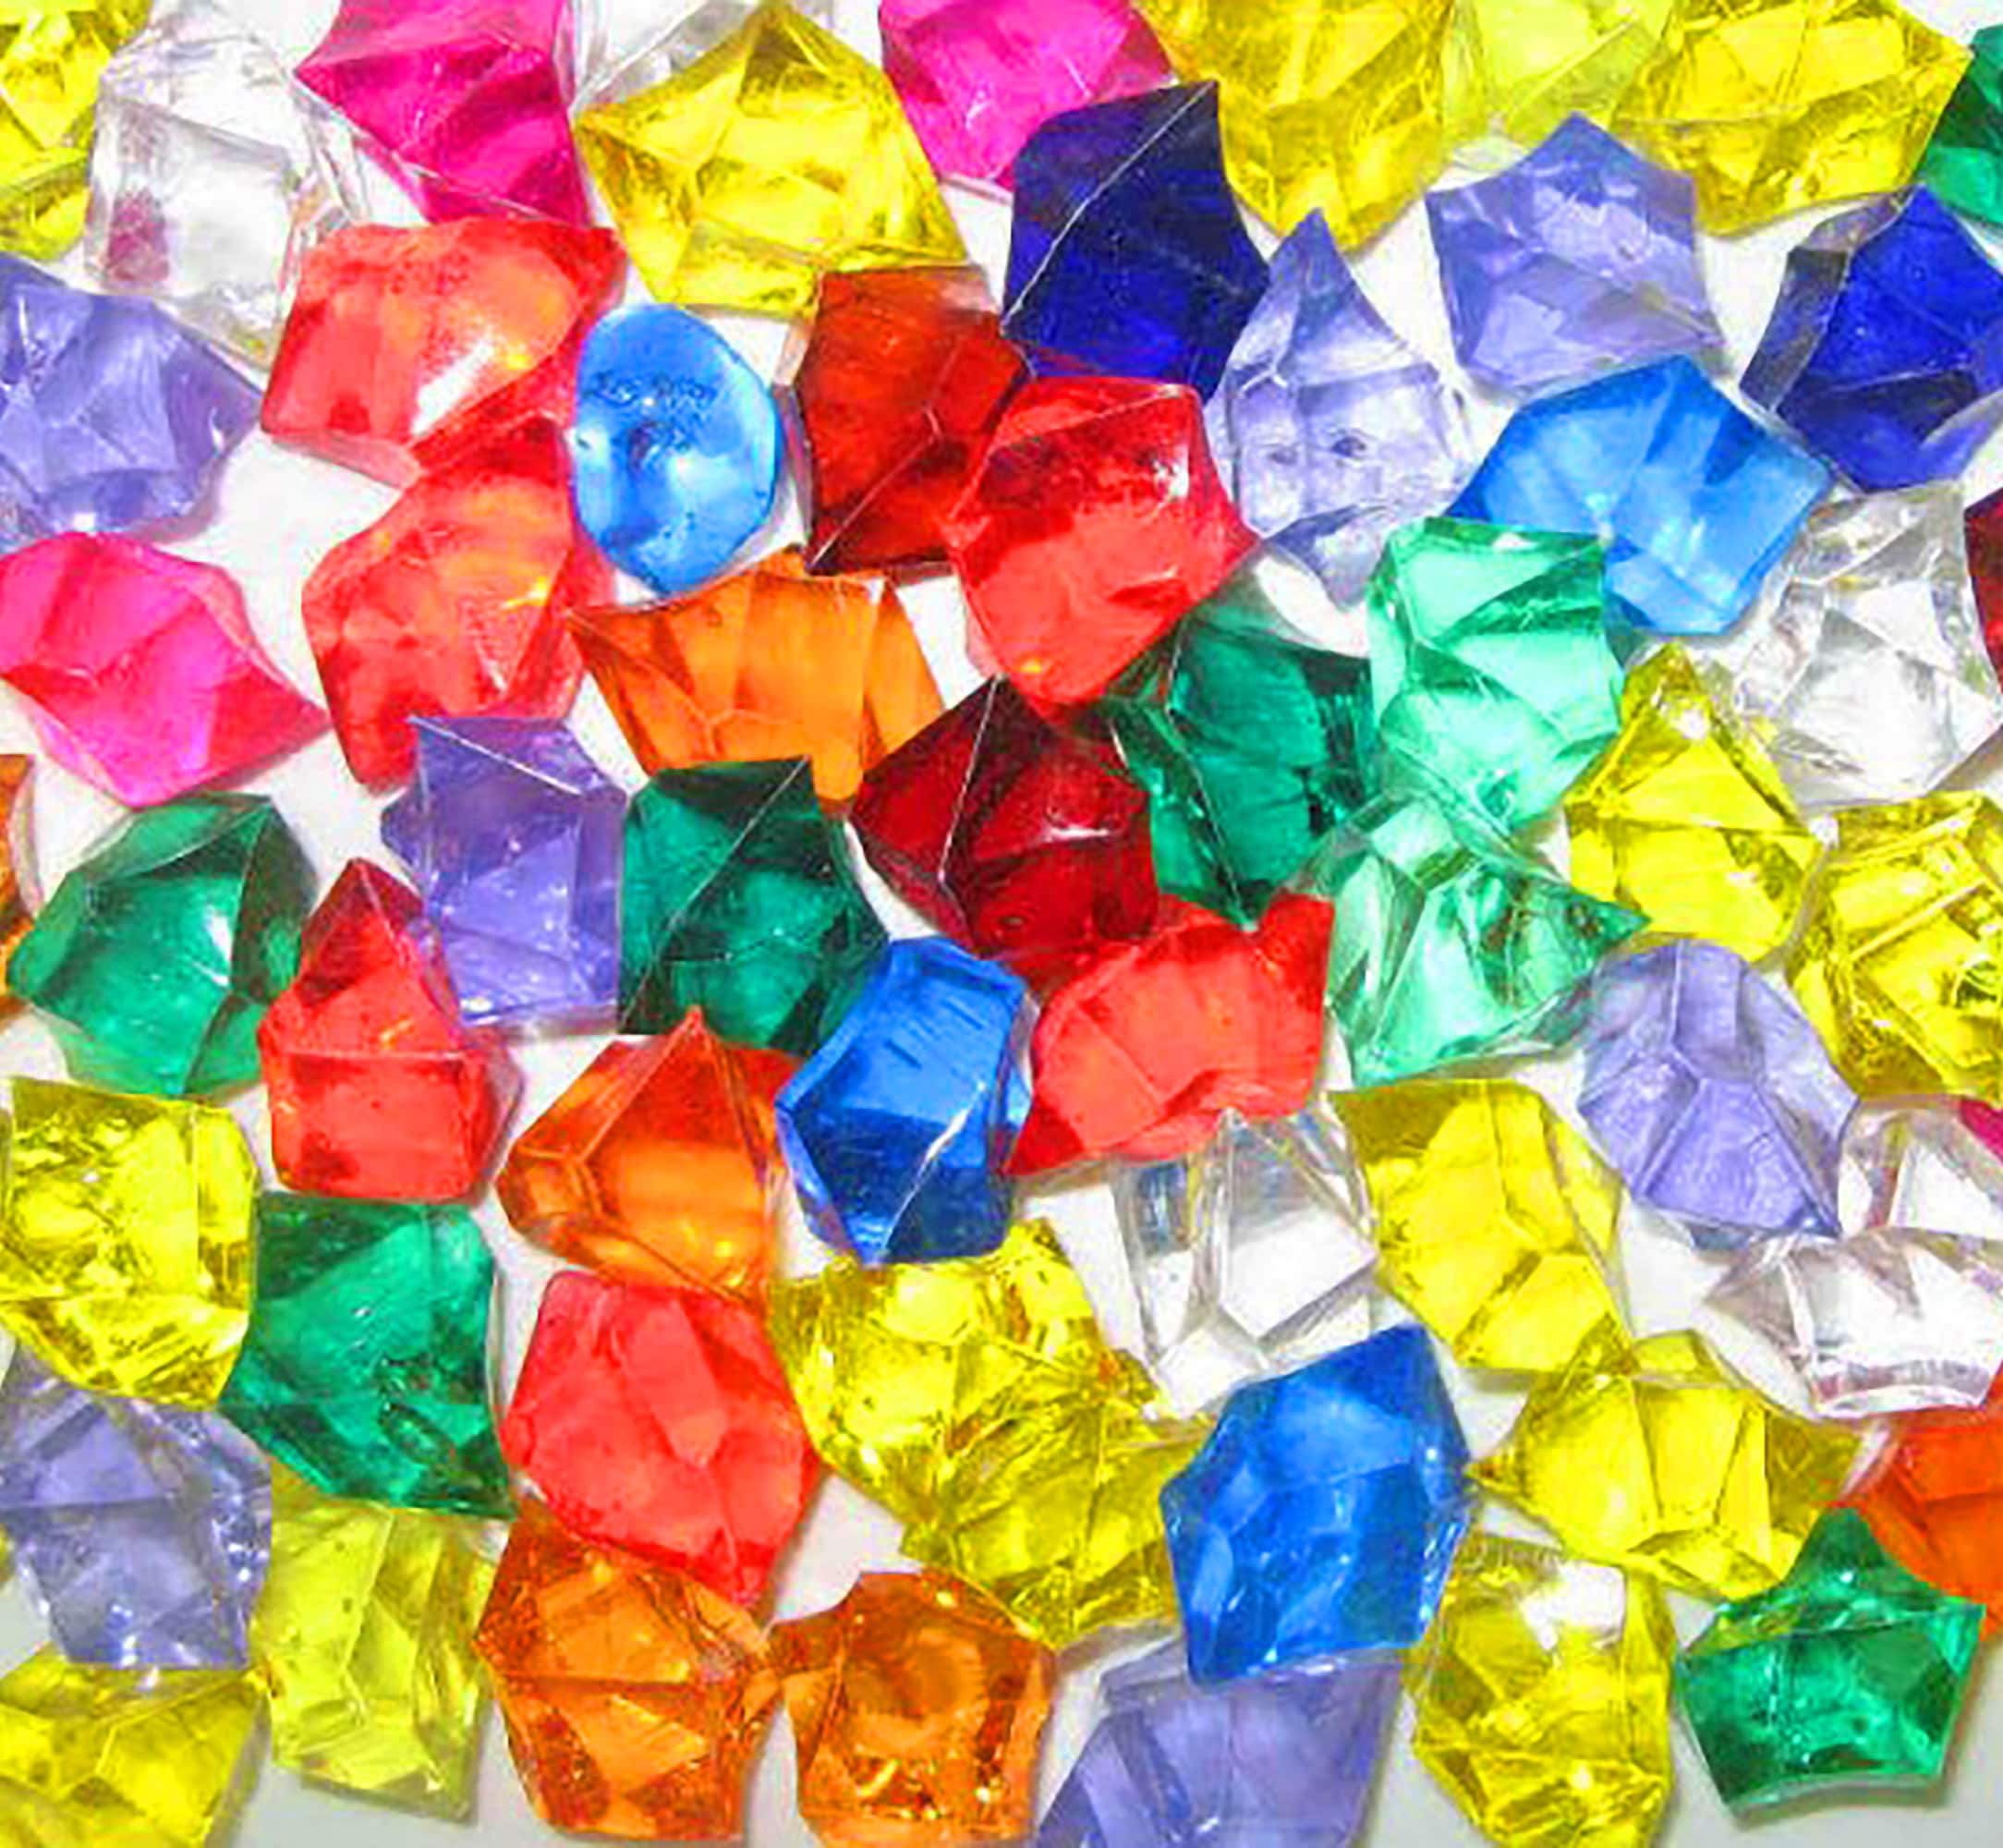 2 Bags of Mixed Colors Pirate Treasure Gems 0.8 Lbs Acrylic Plastic Jewels  for Party & Games Table Scatter Vase Fillers Wedding Decor Favors 